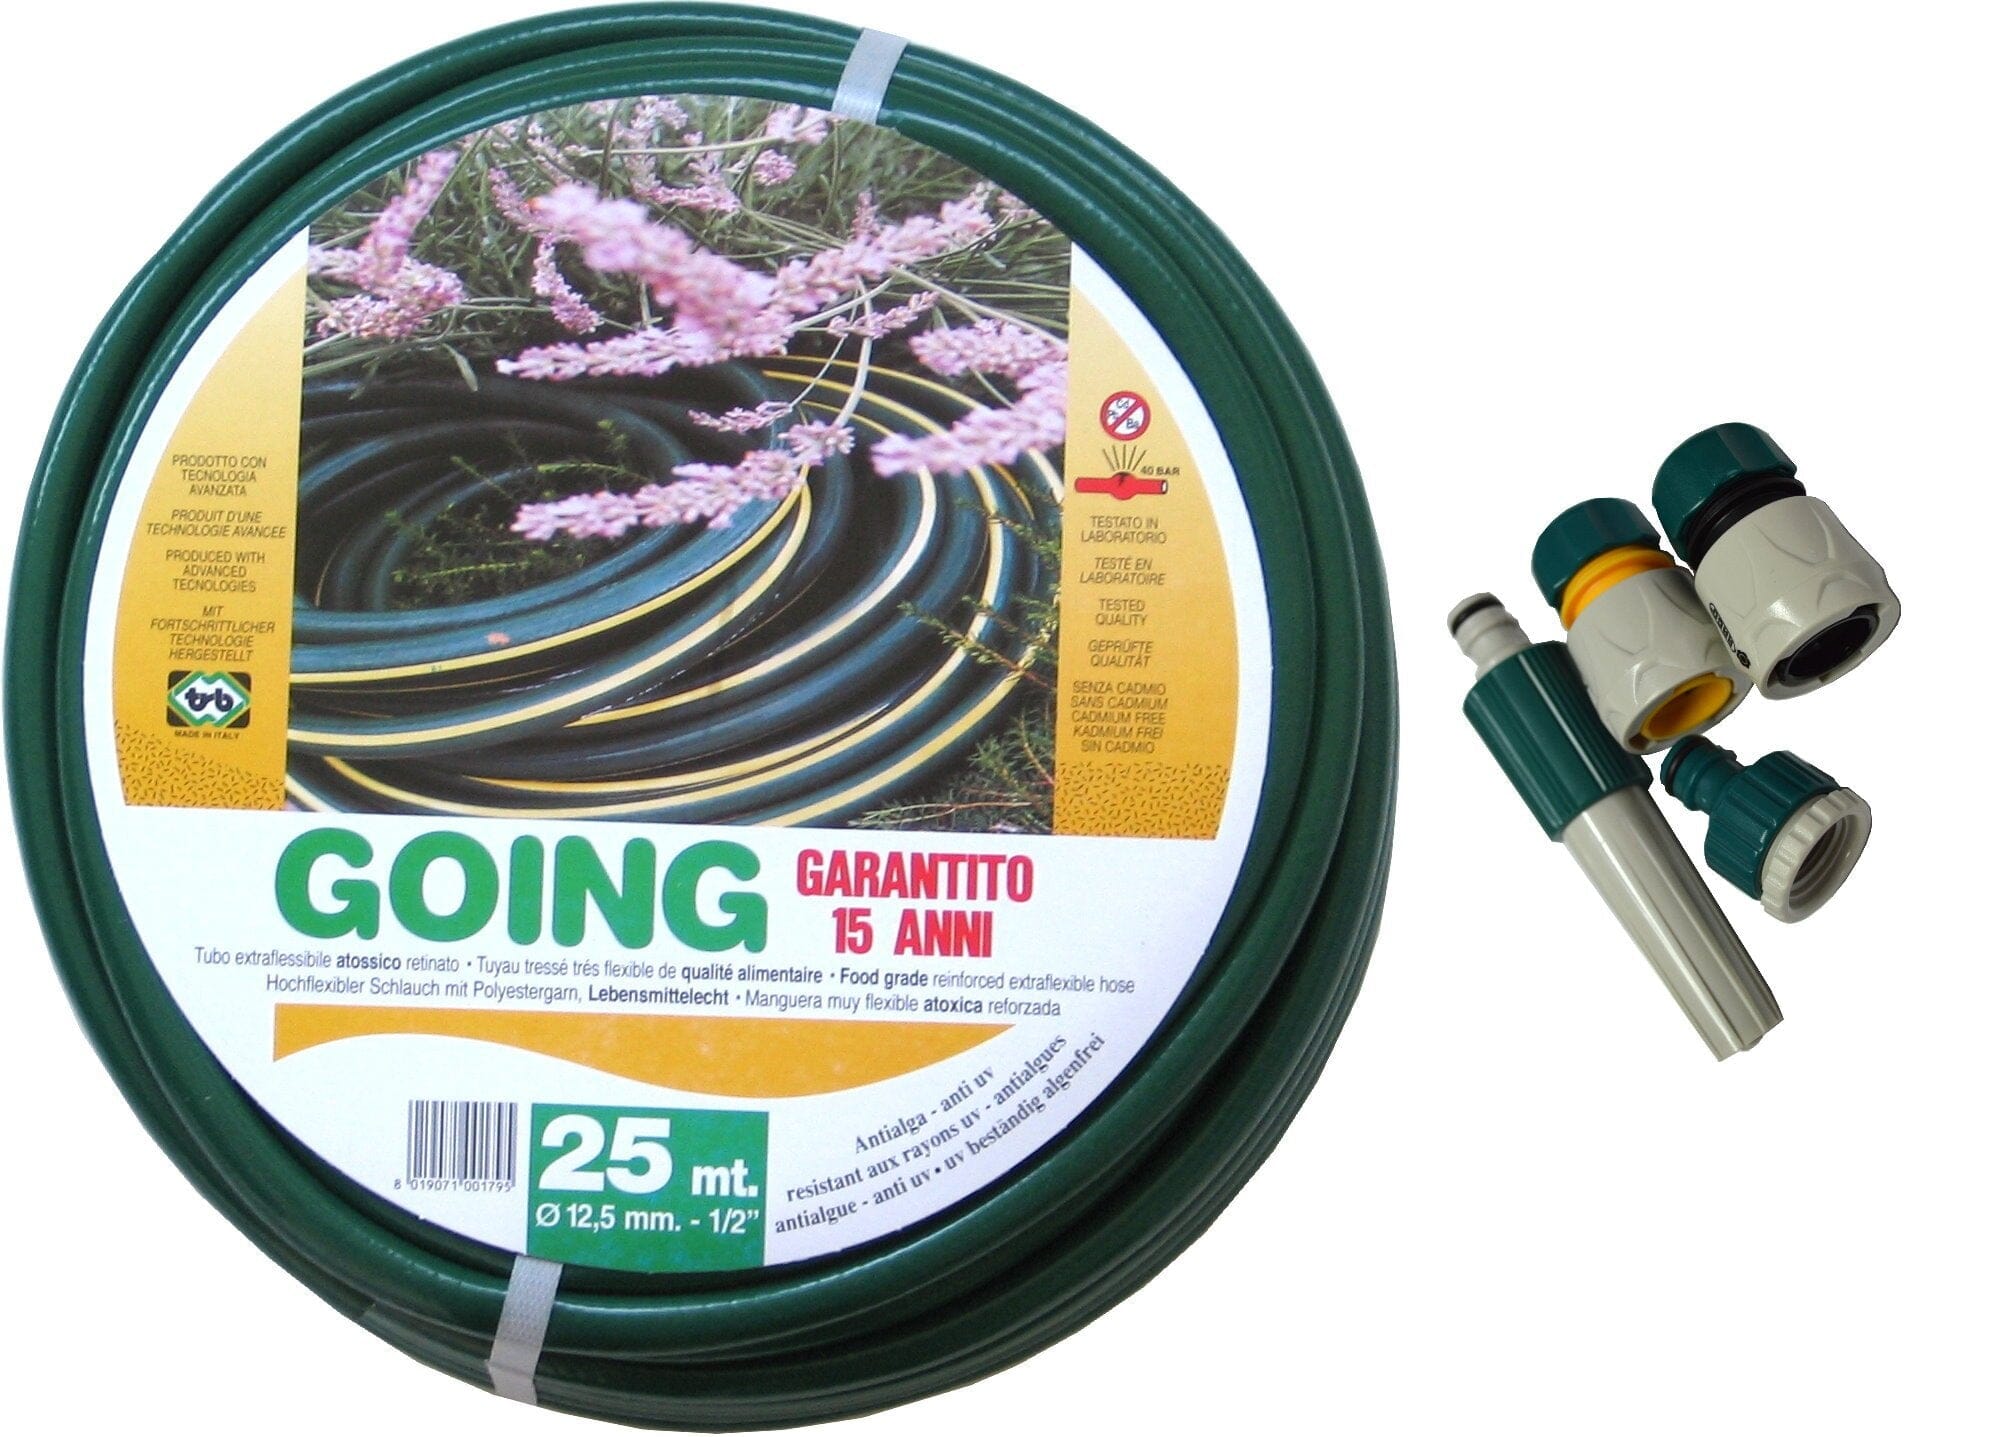 Adflex Plastic Garden Hose with Fittings 12mm x 25m Going